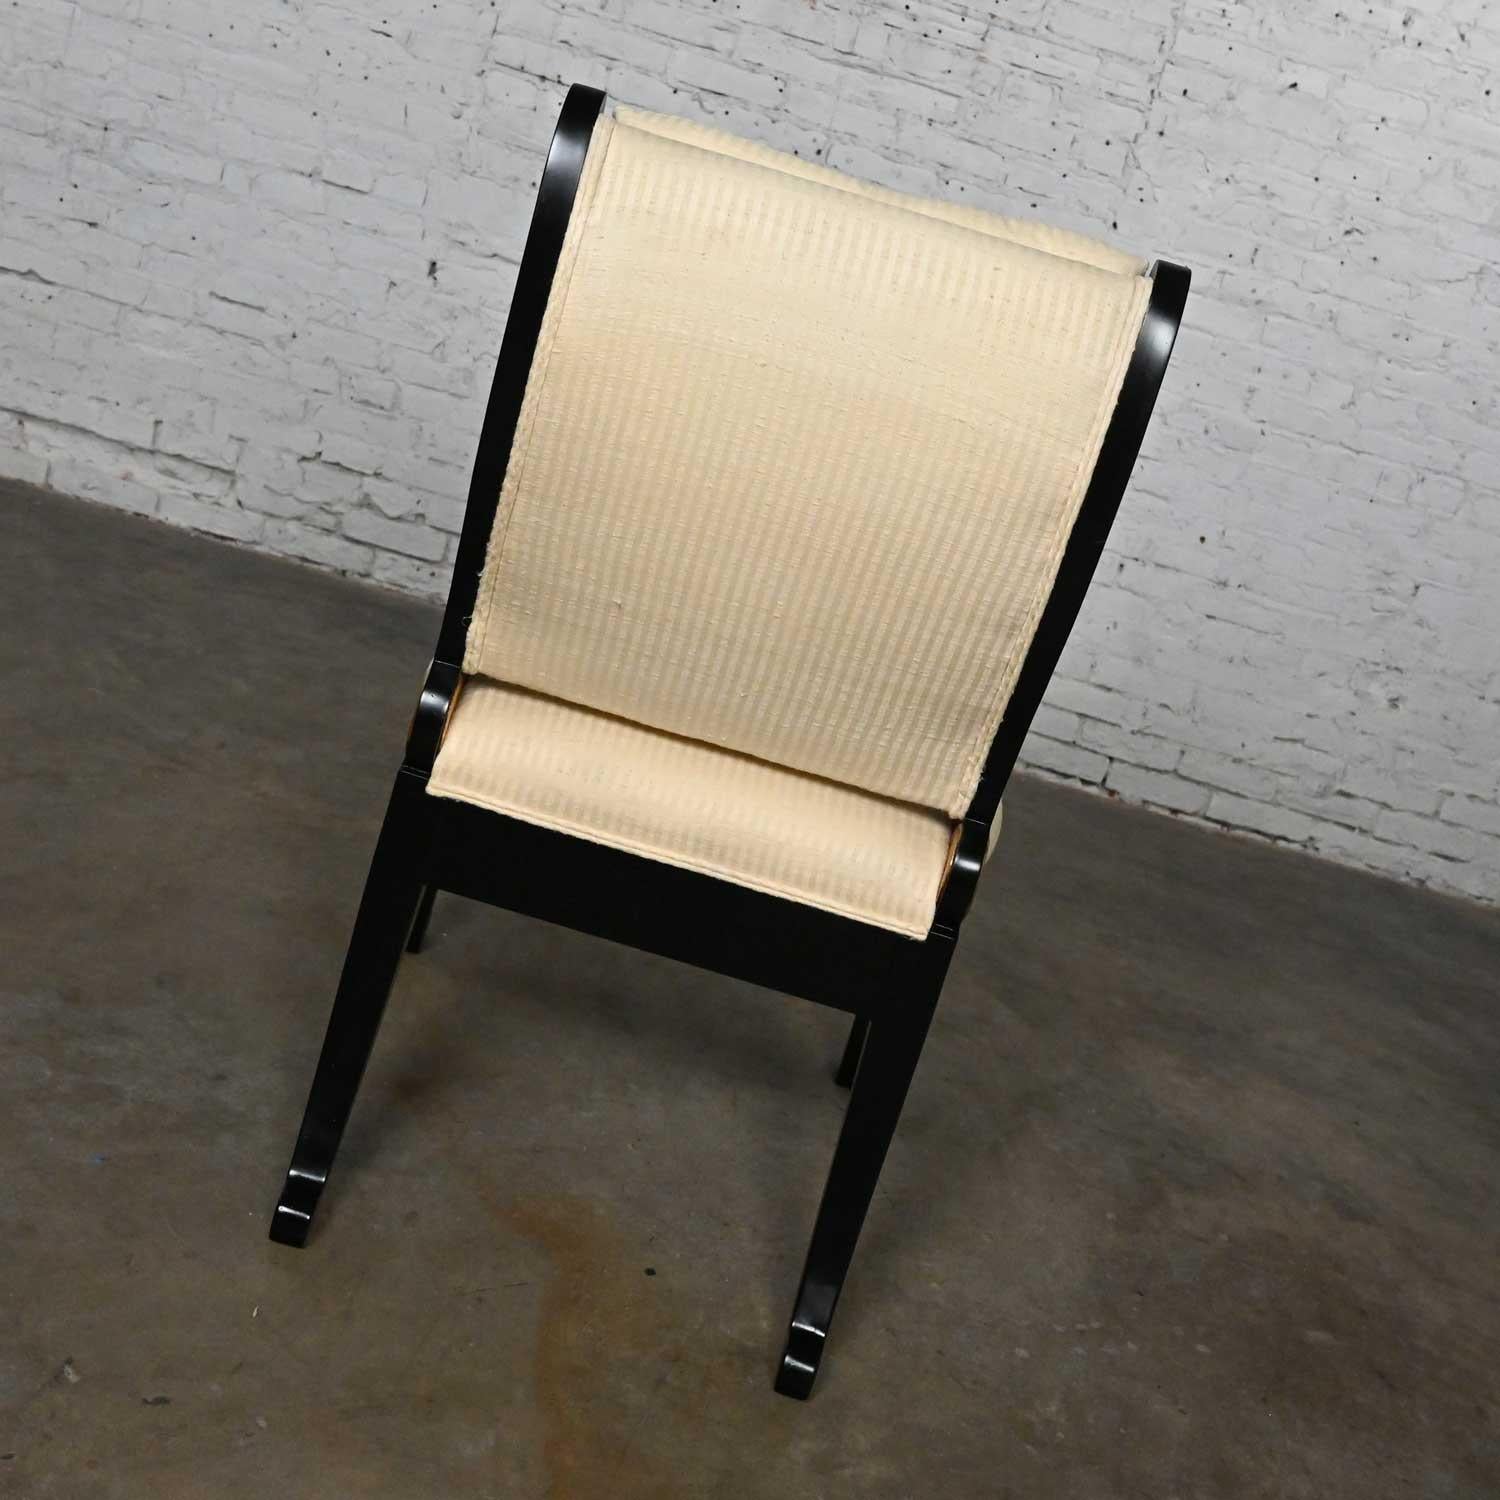 Late 20th Neoclassic Revival Black Side Chair Gilt Wing Accents Off-White Fabric For Sale 3